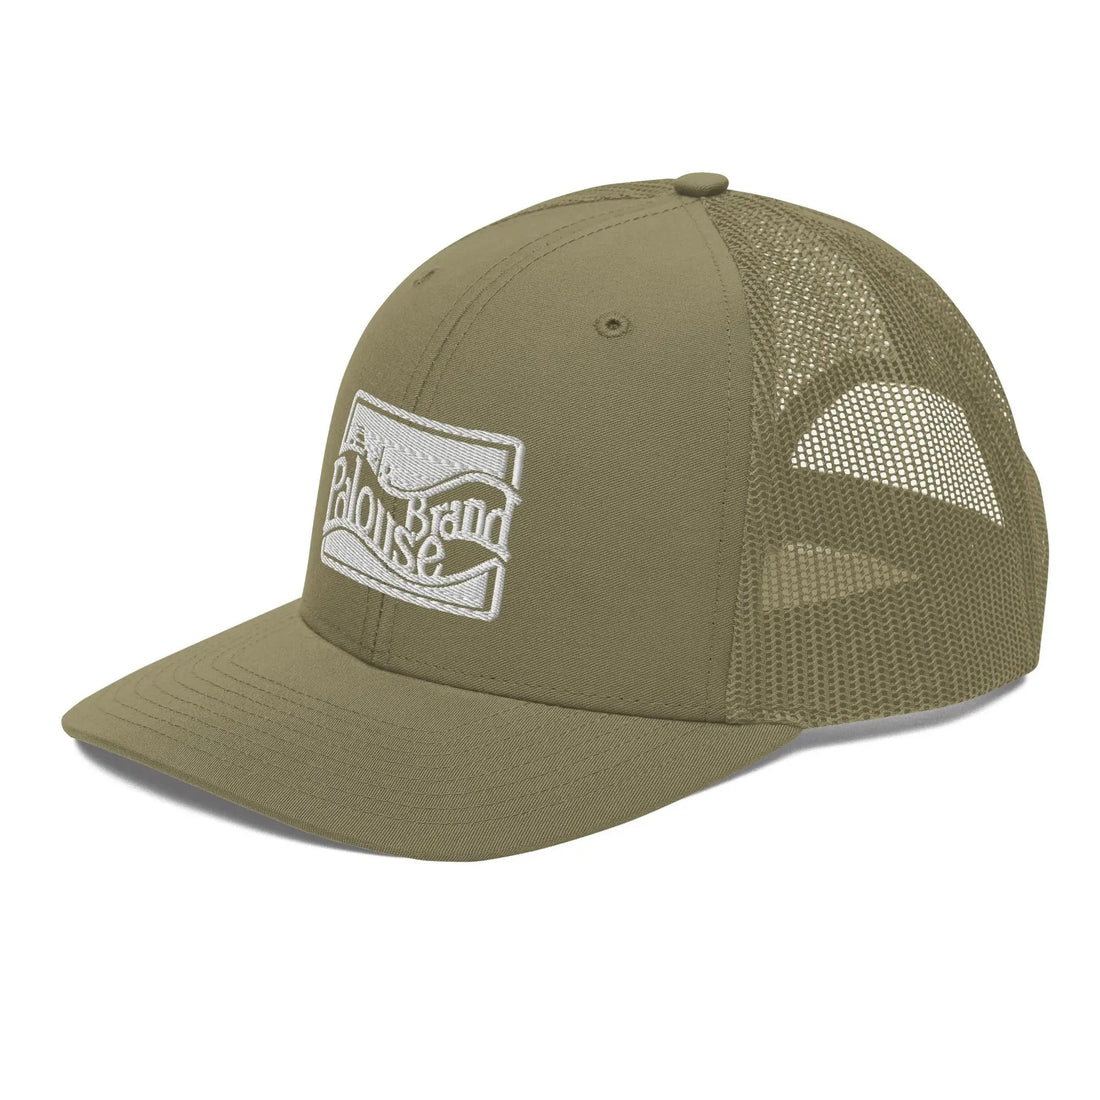 a green trucker hat with a white logo